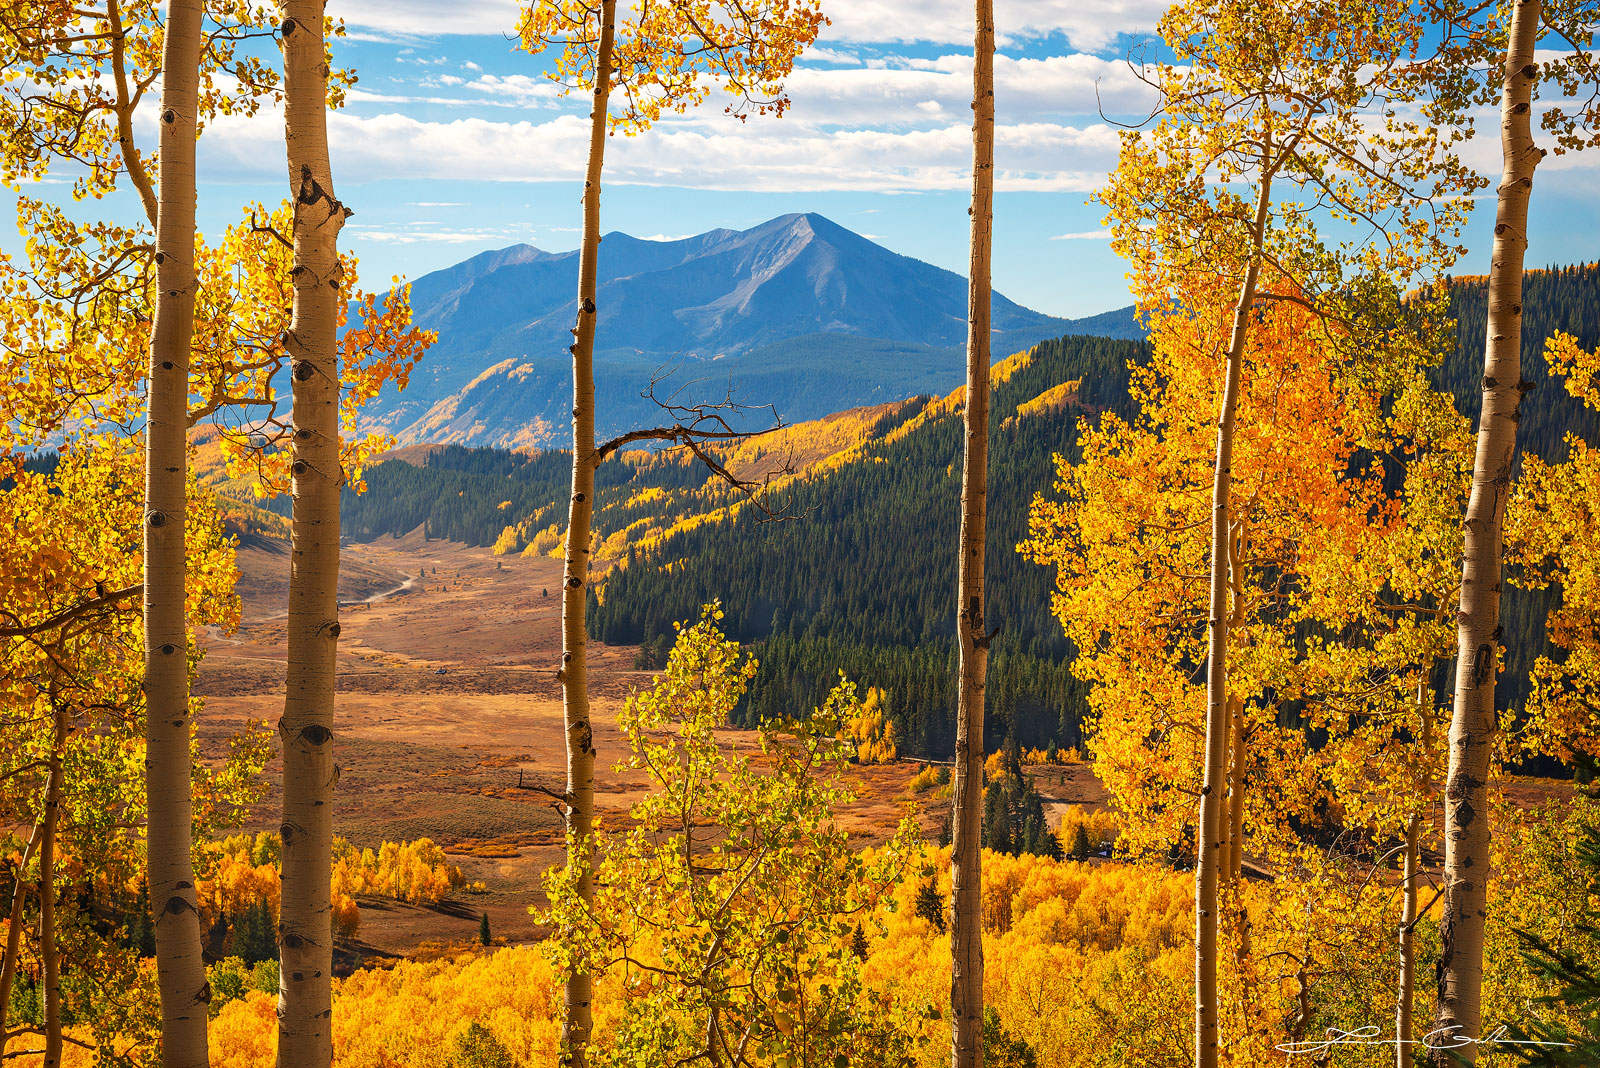 Colorful aspen trees and mountain vista in full fall foliage set against mountain peaks and a golden valley near Crested Butte, Colorado, showcasing the serene harmony of nature's autumn beauty. - Gintchin Fine Art